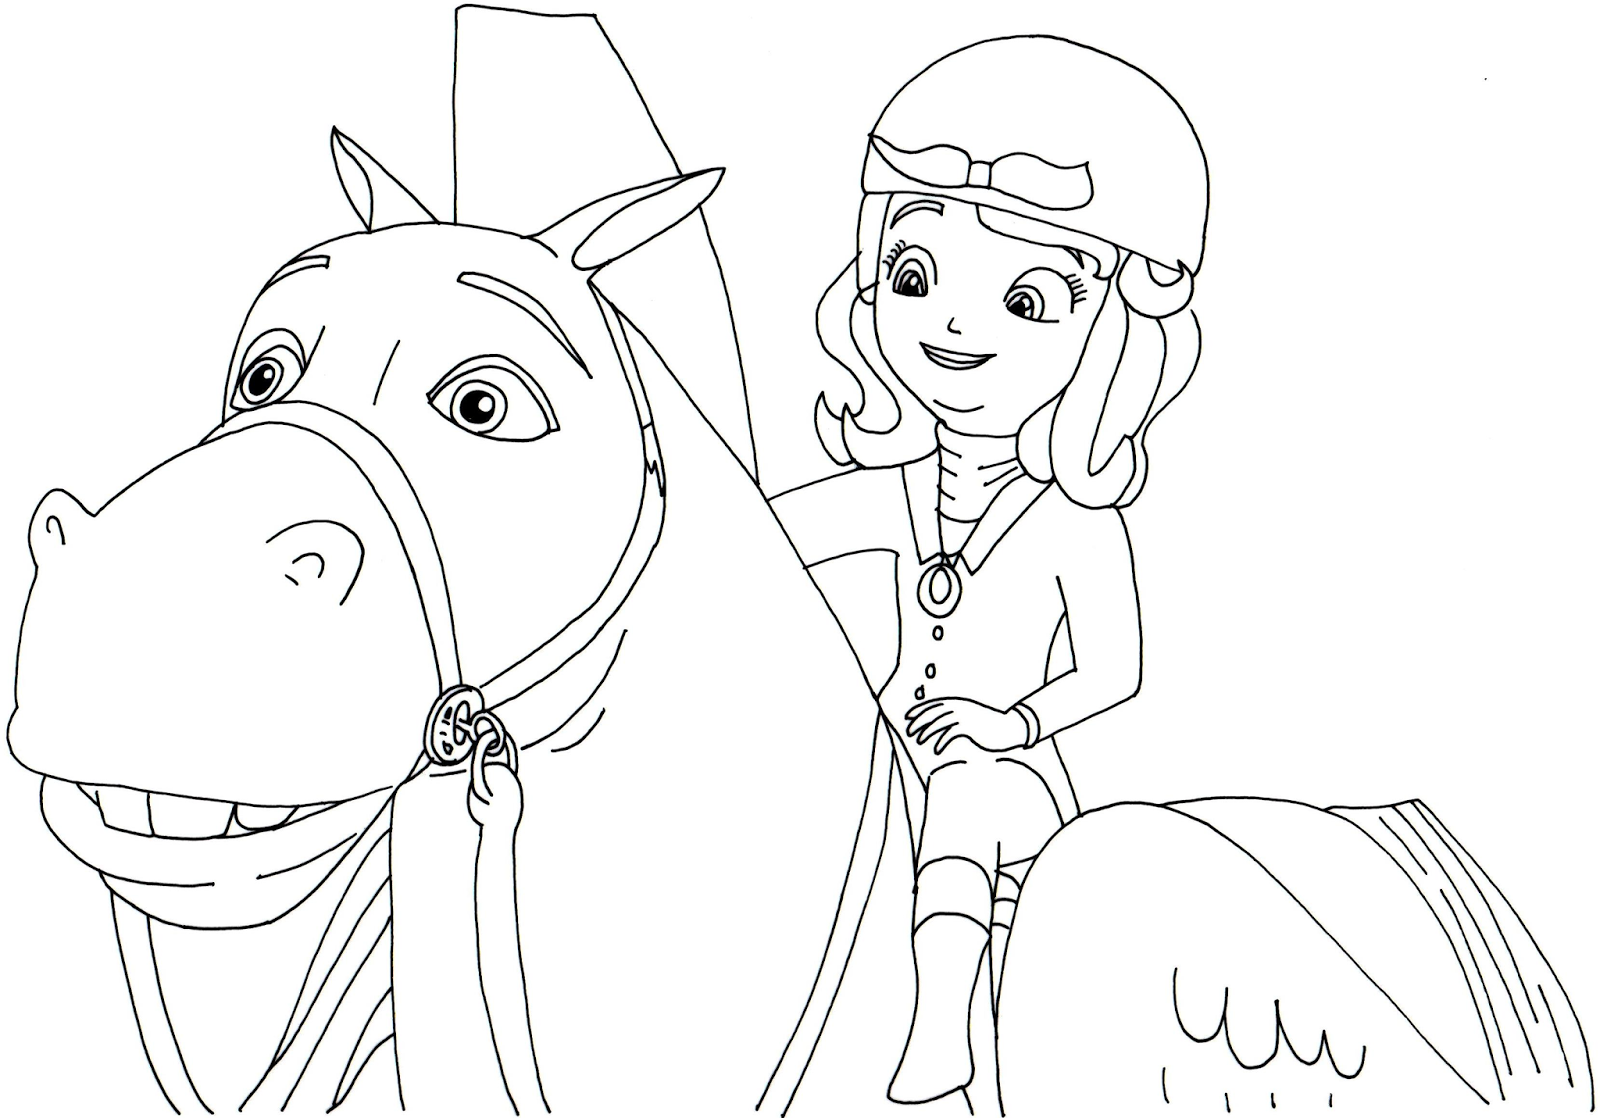 Sofia The First Printable Coloring Pages at GetDrawings | Free download